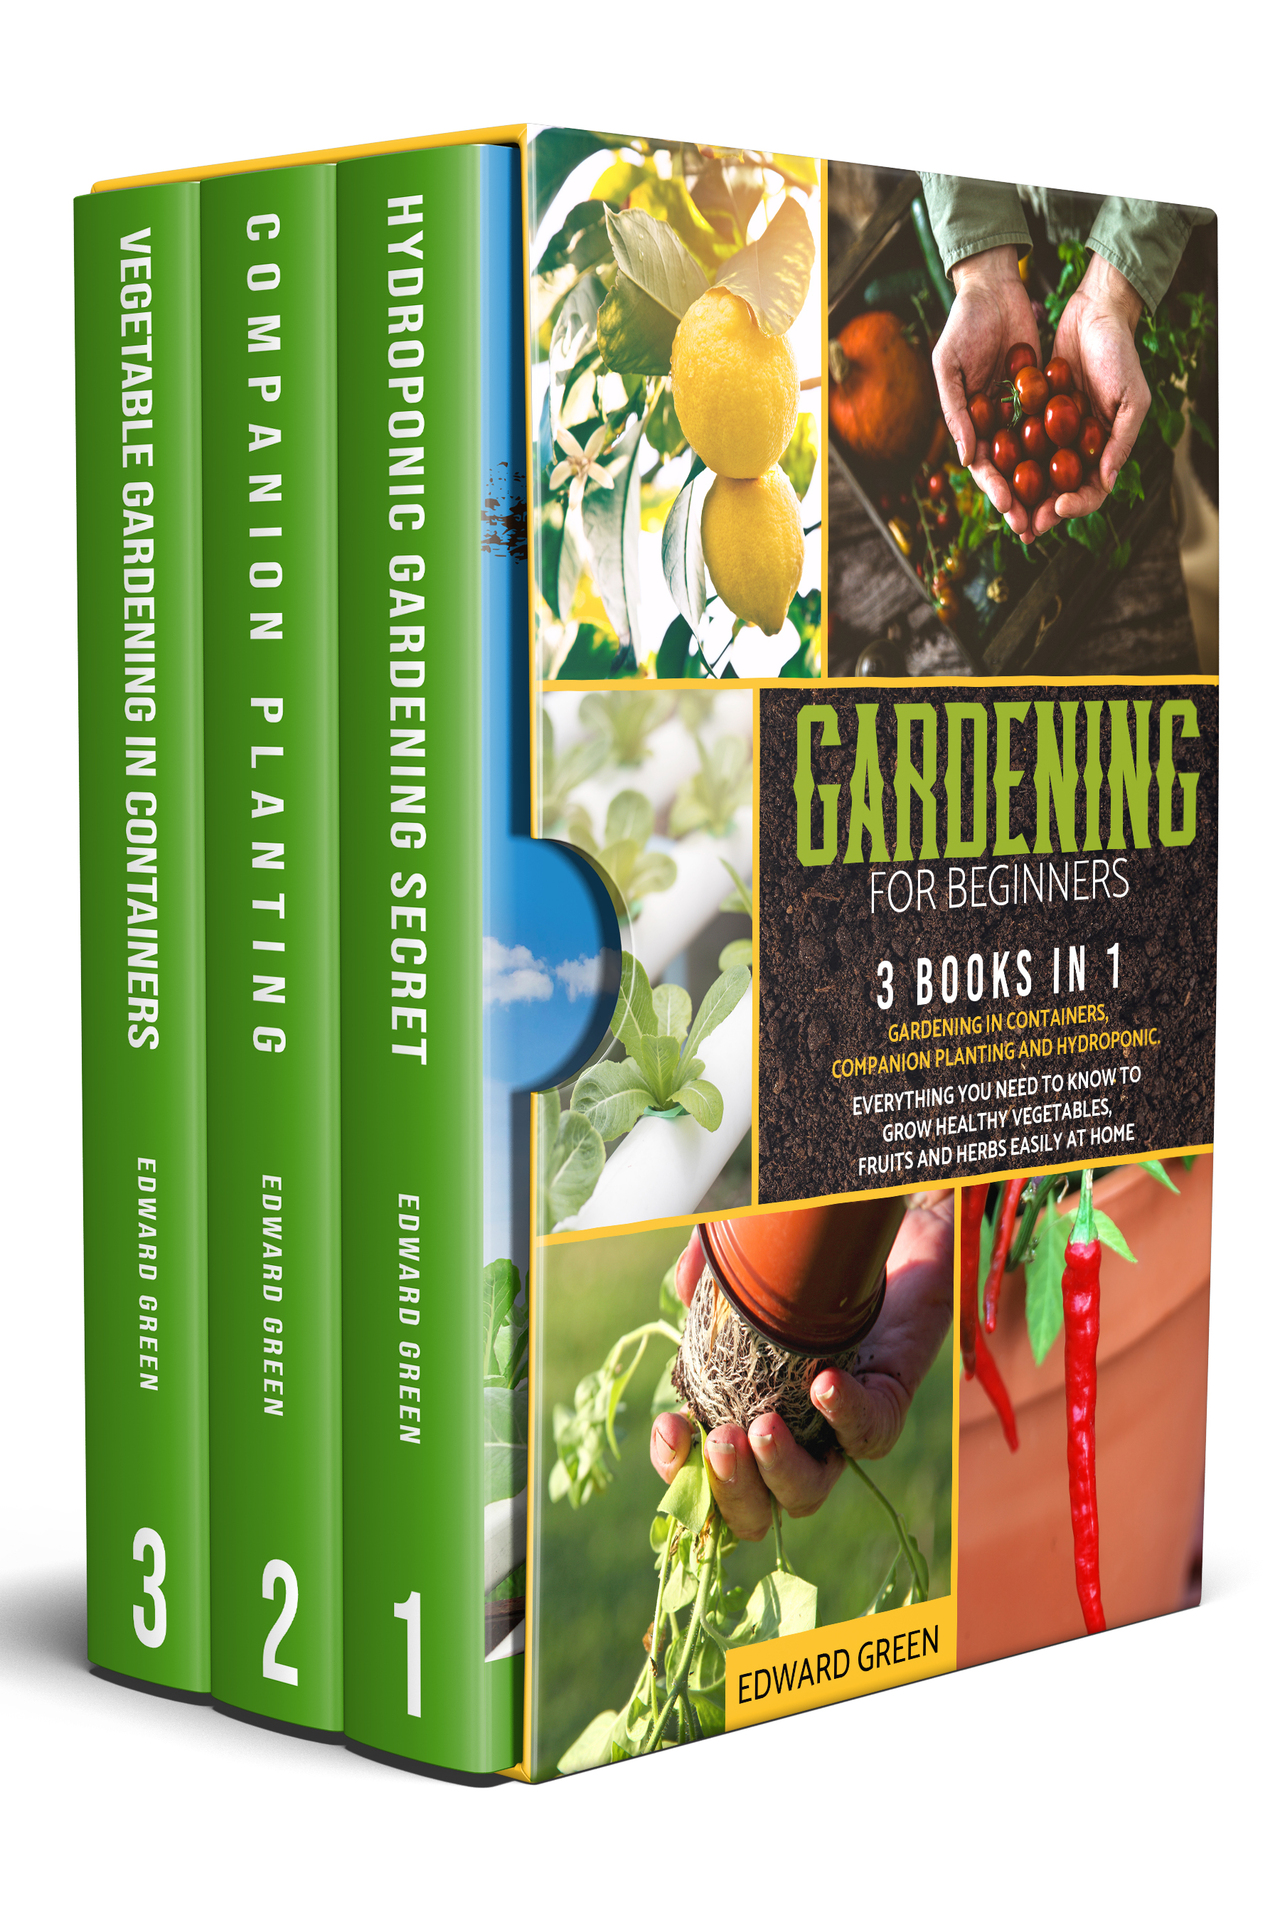 Gardening for beginners 3 books in 1 Gardening in containers companion - photo 1